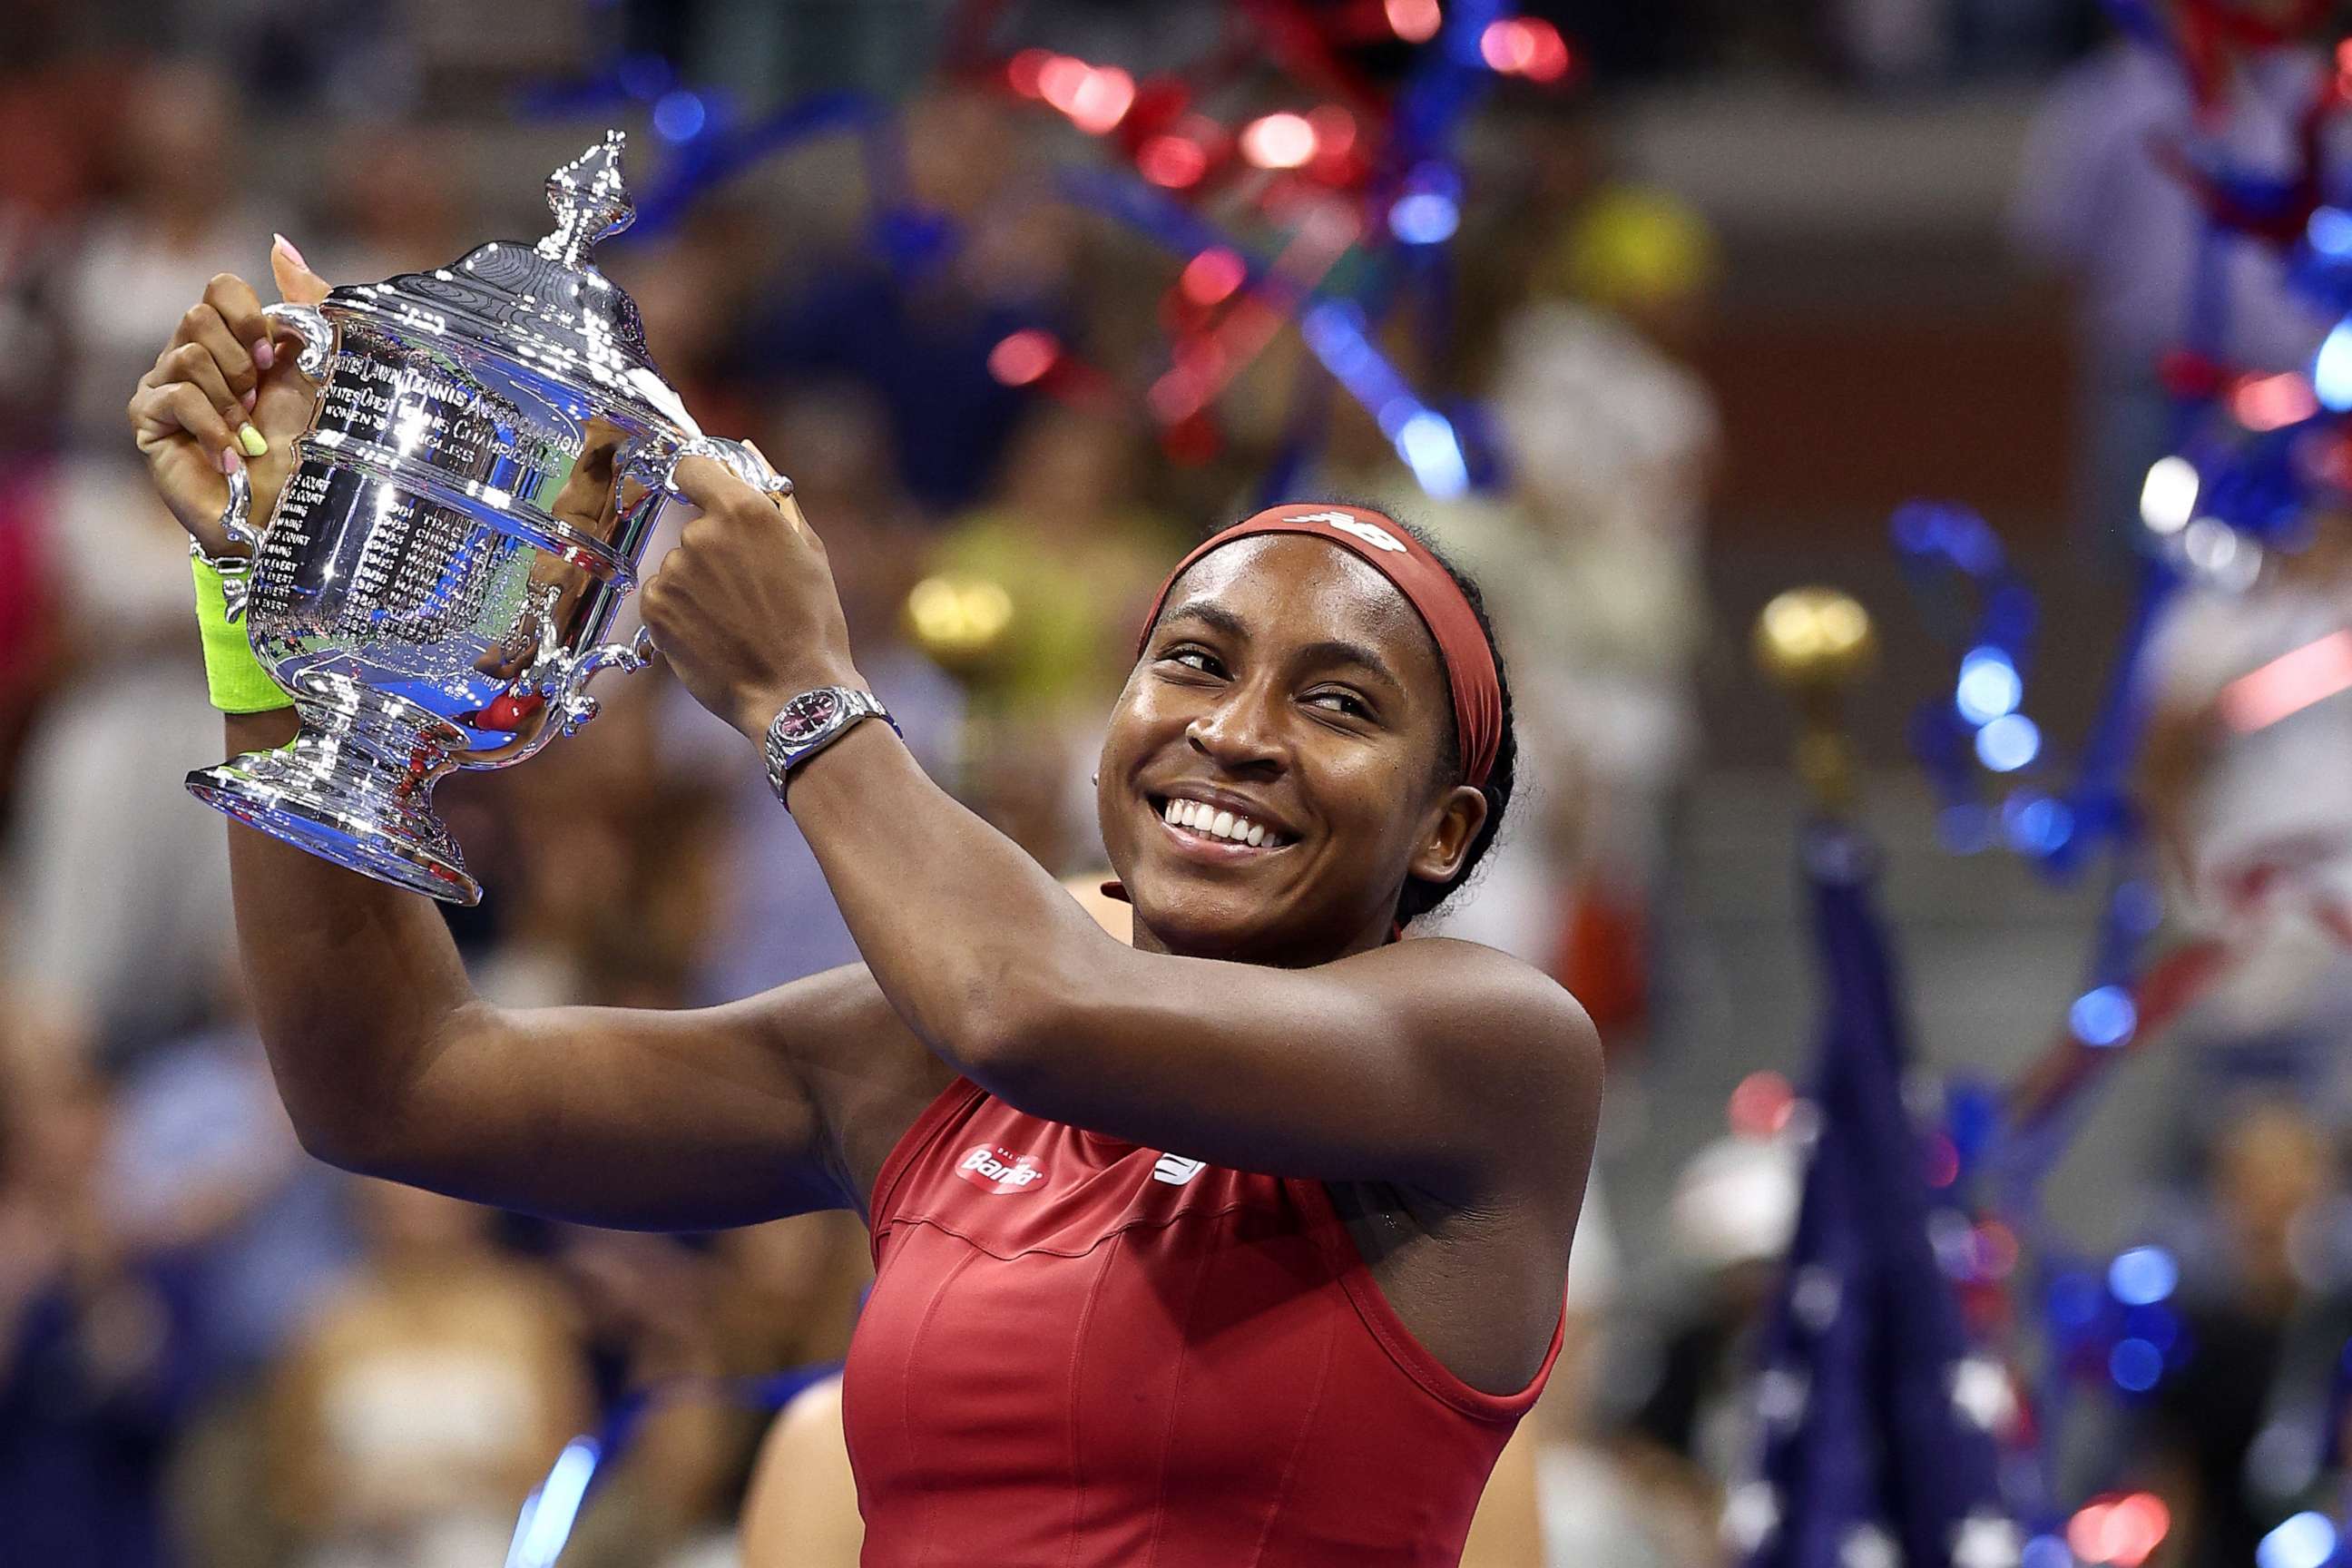 PHOTO: Coco Gauff of the United States reacts after defeating Aryna Sabalenka of Belarus in their Women's Singles Final match on Day Thirteen of the 2023 US Open on Sept. 9, 2023 in Queens, New York.